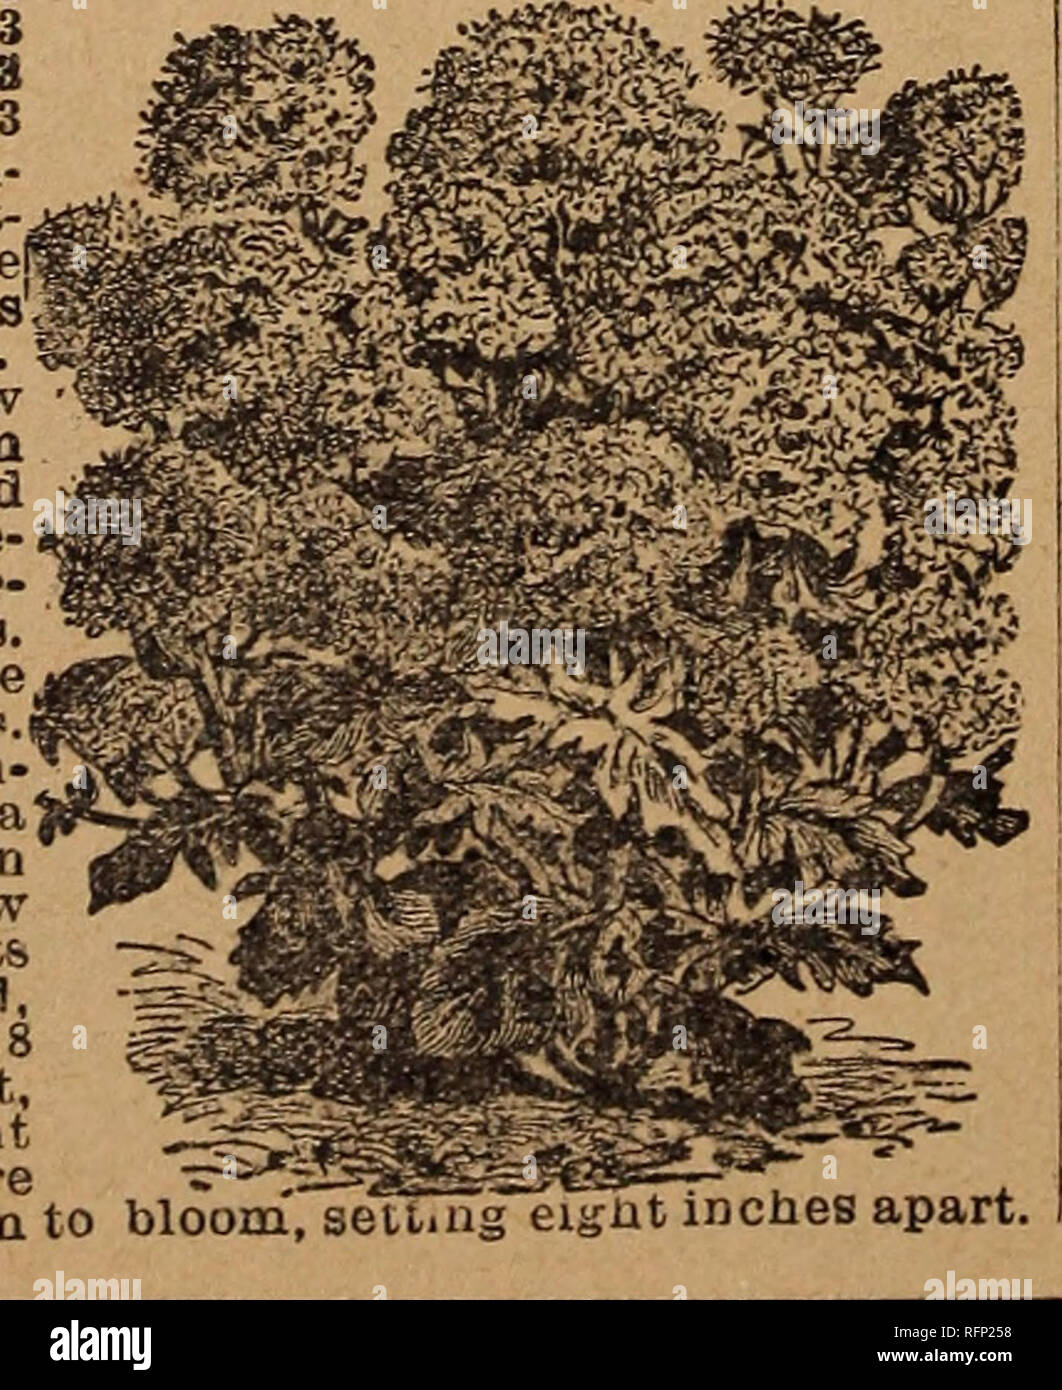 . Park's floral guide, 1896. Nursery stock Pennsylvania Catalogs; Flowers Seeds Catalogs. Ctieeno&amp;r-'i &gt;u ct fastigiata. Cape of Good Hope.... 5 A plant growing from six to nine inches high, mmi and compact, and covered with au a jundance of pink- •48/7 $s$Fjl/3k ish-white flowers. Useful for edgings or bor lers. Set 6 inches apart. This little plant will be^r acquaint- ance, and thost  ho are fond of variety should add it to their collection. In its na- tive home it is a perennial; but in our couutry at the North it should be treated as an annual. It i3 said to ap- pear well planted Stock Photo